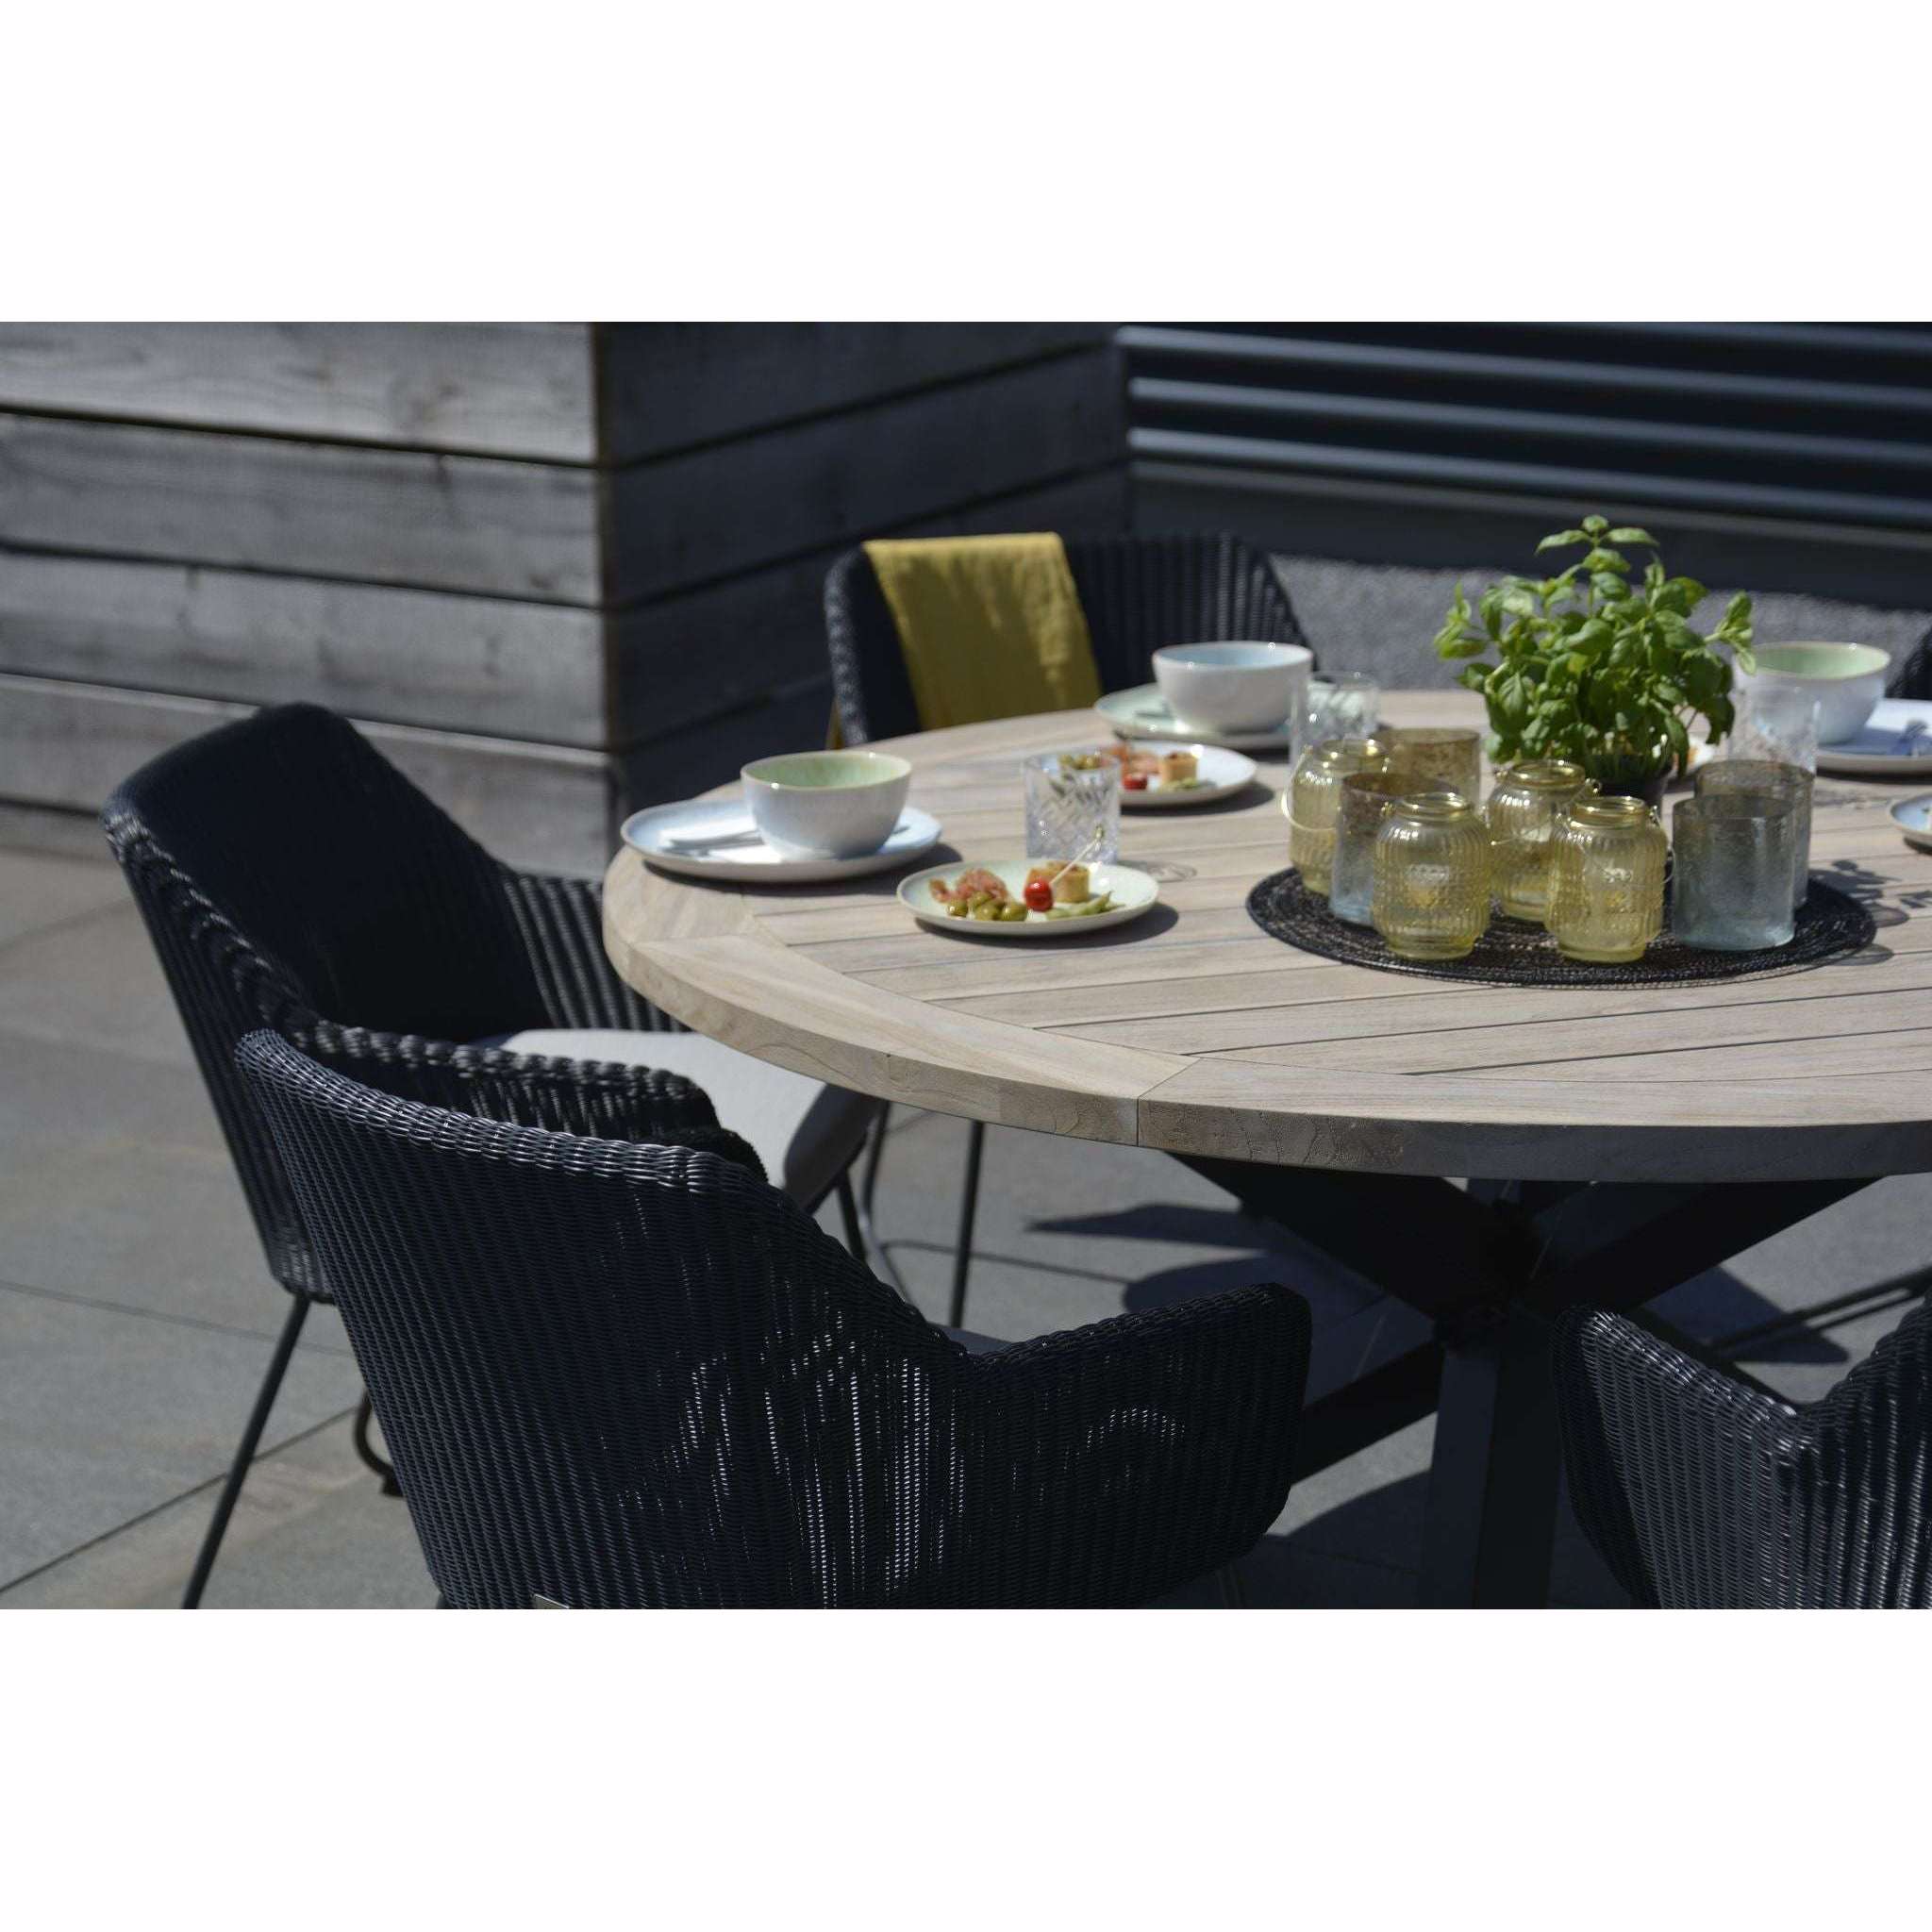 Exceptional Garden:4 Seasons Outdoor Avila 6 Seater Dining Set with Louver Teak Round Dining Table